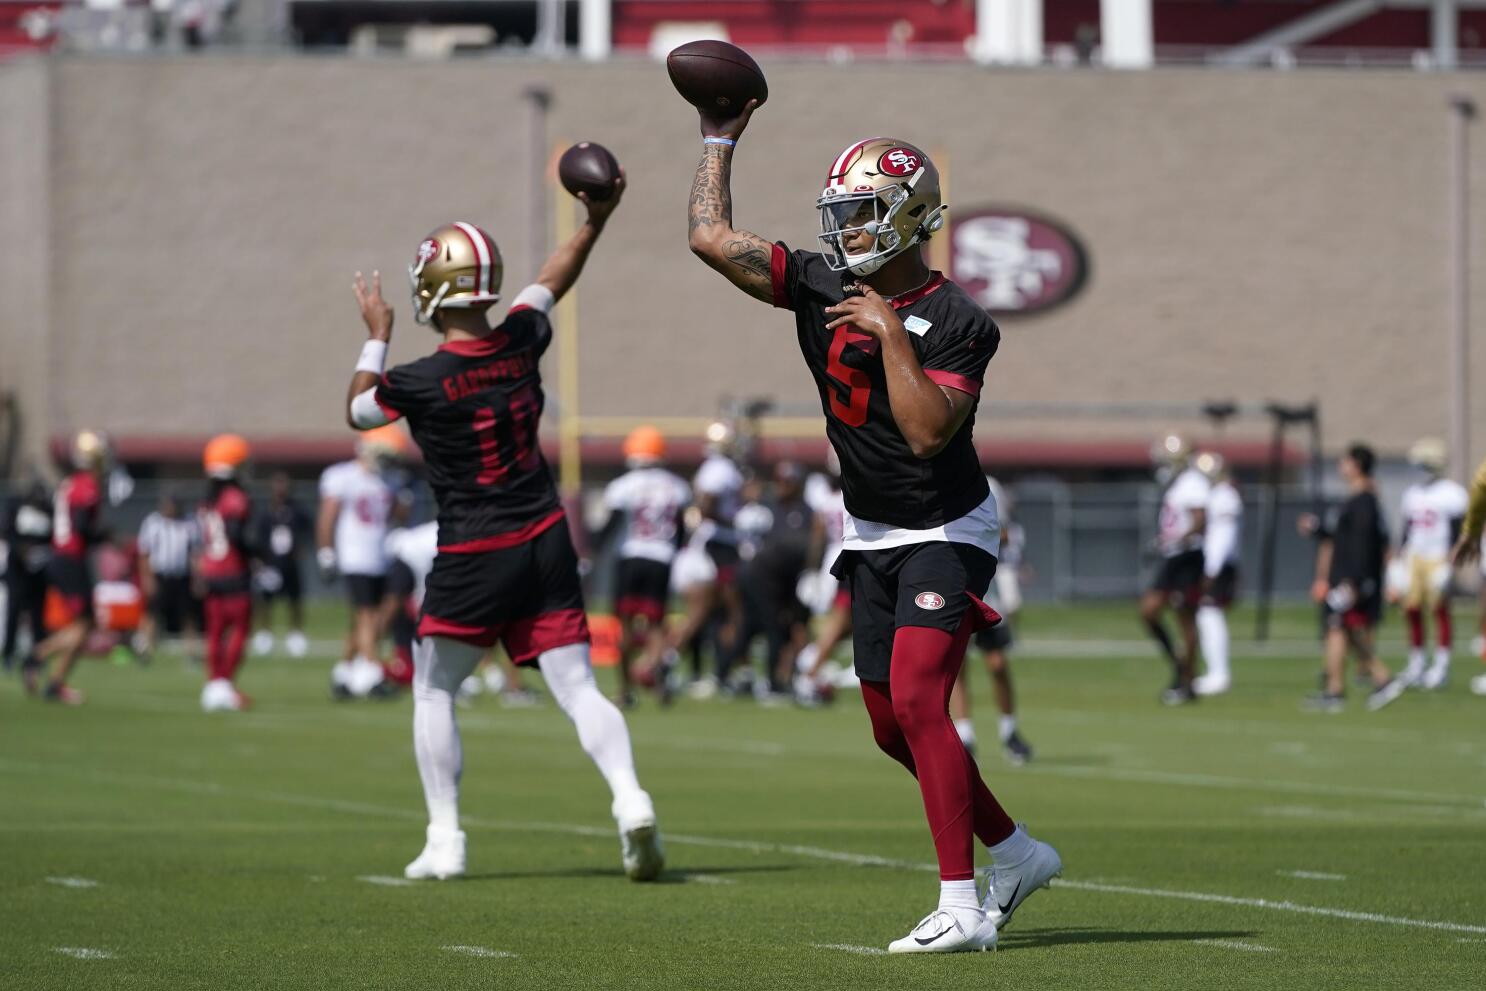 2021 NFL Preview: 49ers are good, with a QB controversy